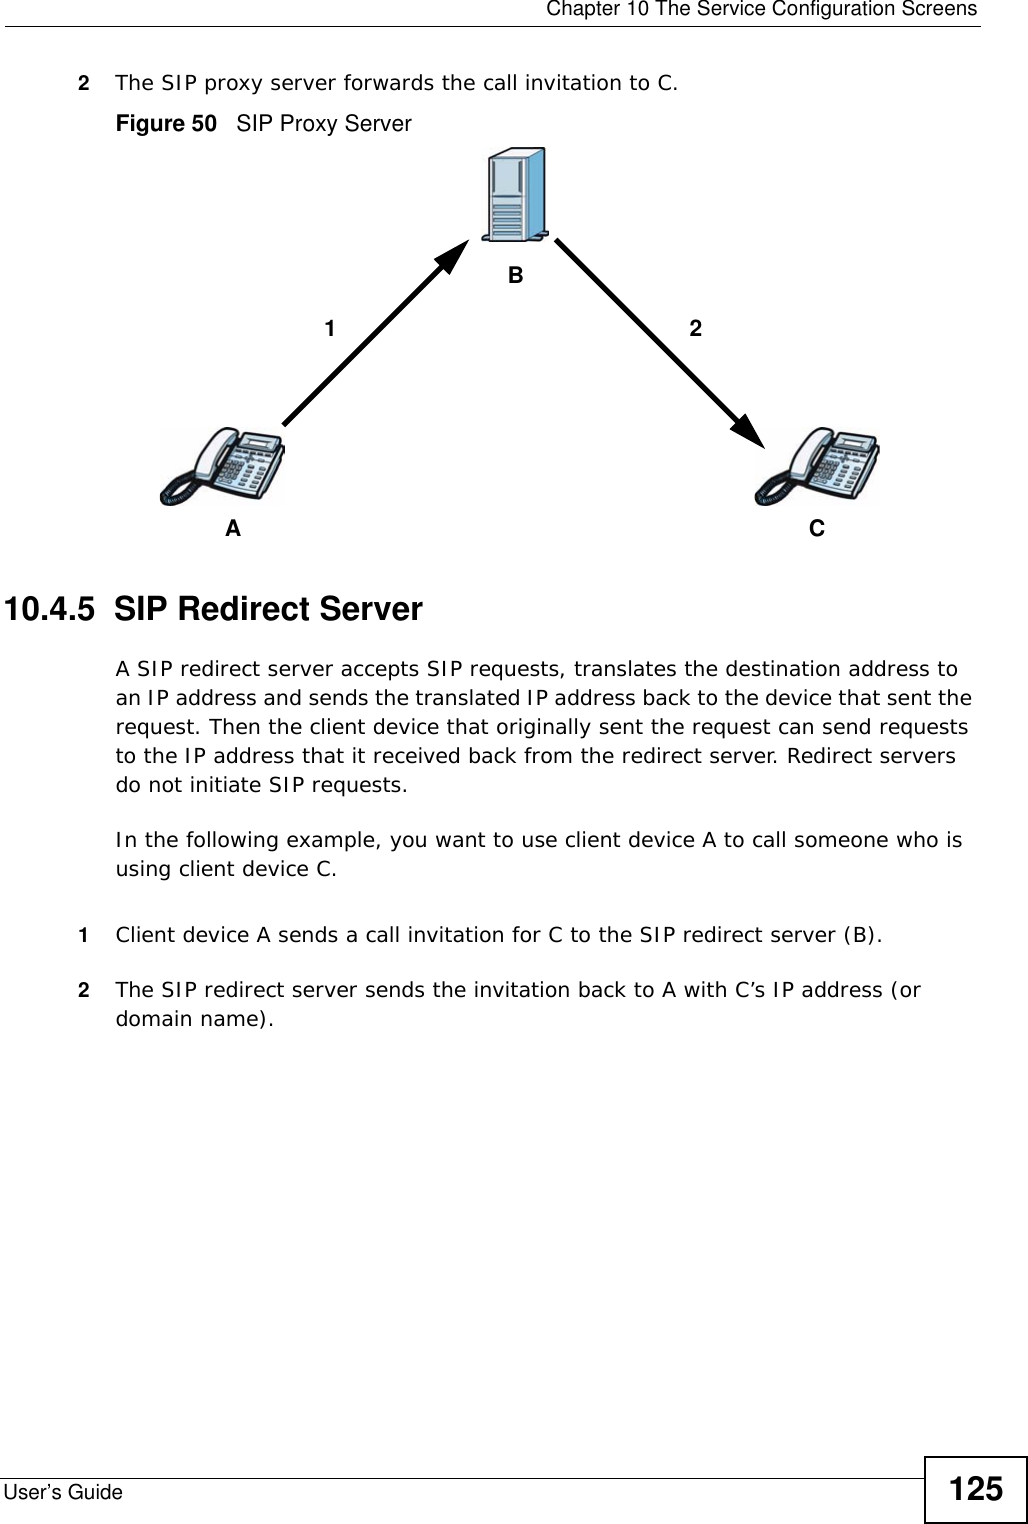  Chapter 10 The Service Configuration ScreensUser’s Guide 1252The SIP proxy server forwards the call invitation to C.Figure 50   SIP Proxy Server10.4.5  SIP Redirect ServerA SIP redirect server accepts SIP requests, translates the destination address to an IP address and sends the translated IP address back to the device that sent the request. Then the client device that originally sent the request can send requests to the IP address that it received back from the redirect server. Redirect servers do not initiate SIP requests. In the following example, you want to use client device A to call someone who is using client device C. 1Client device A sends a call invitation for C to the SIP redirect server (B).2The SIP redirect server sends the invitation back to A with C’s IP address (or domain name).ACB12